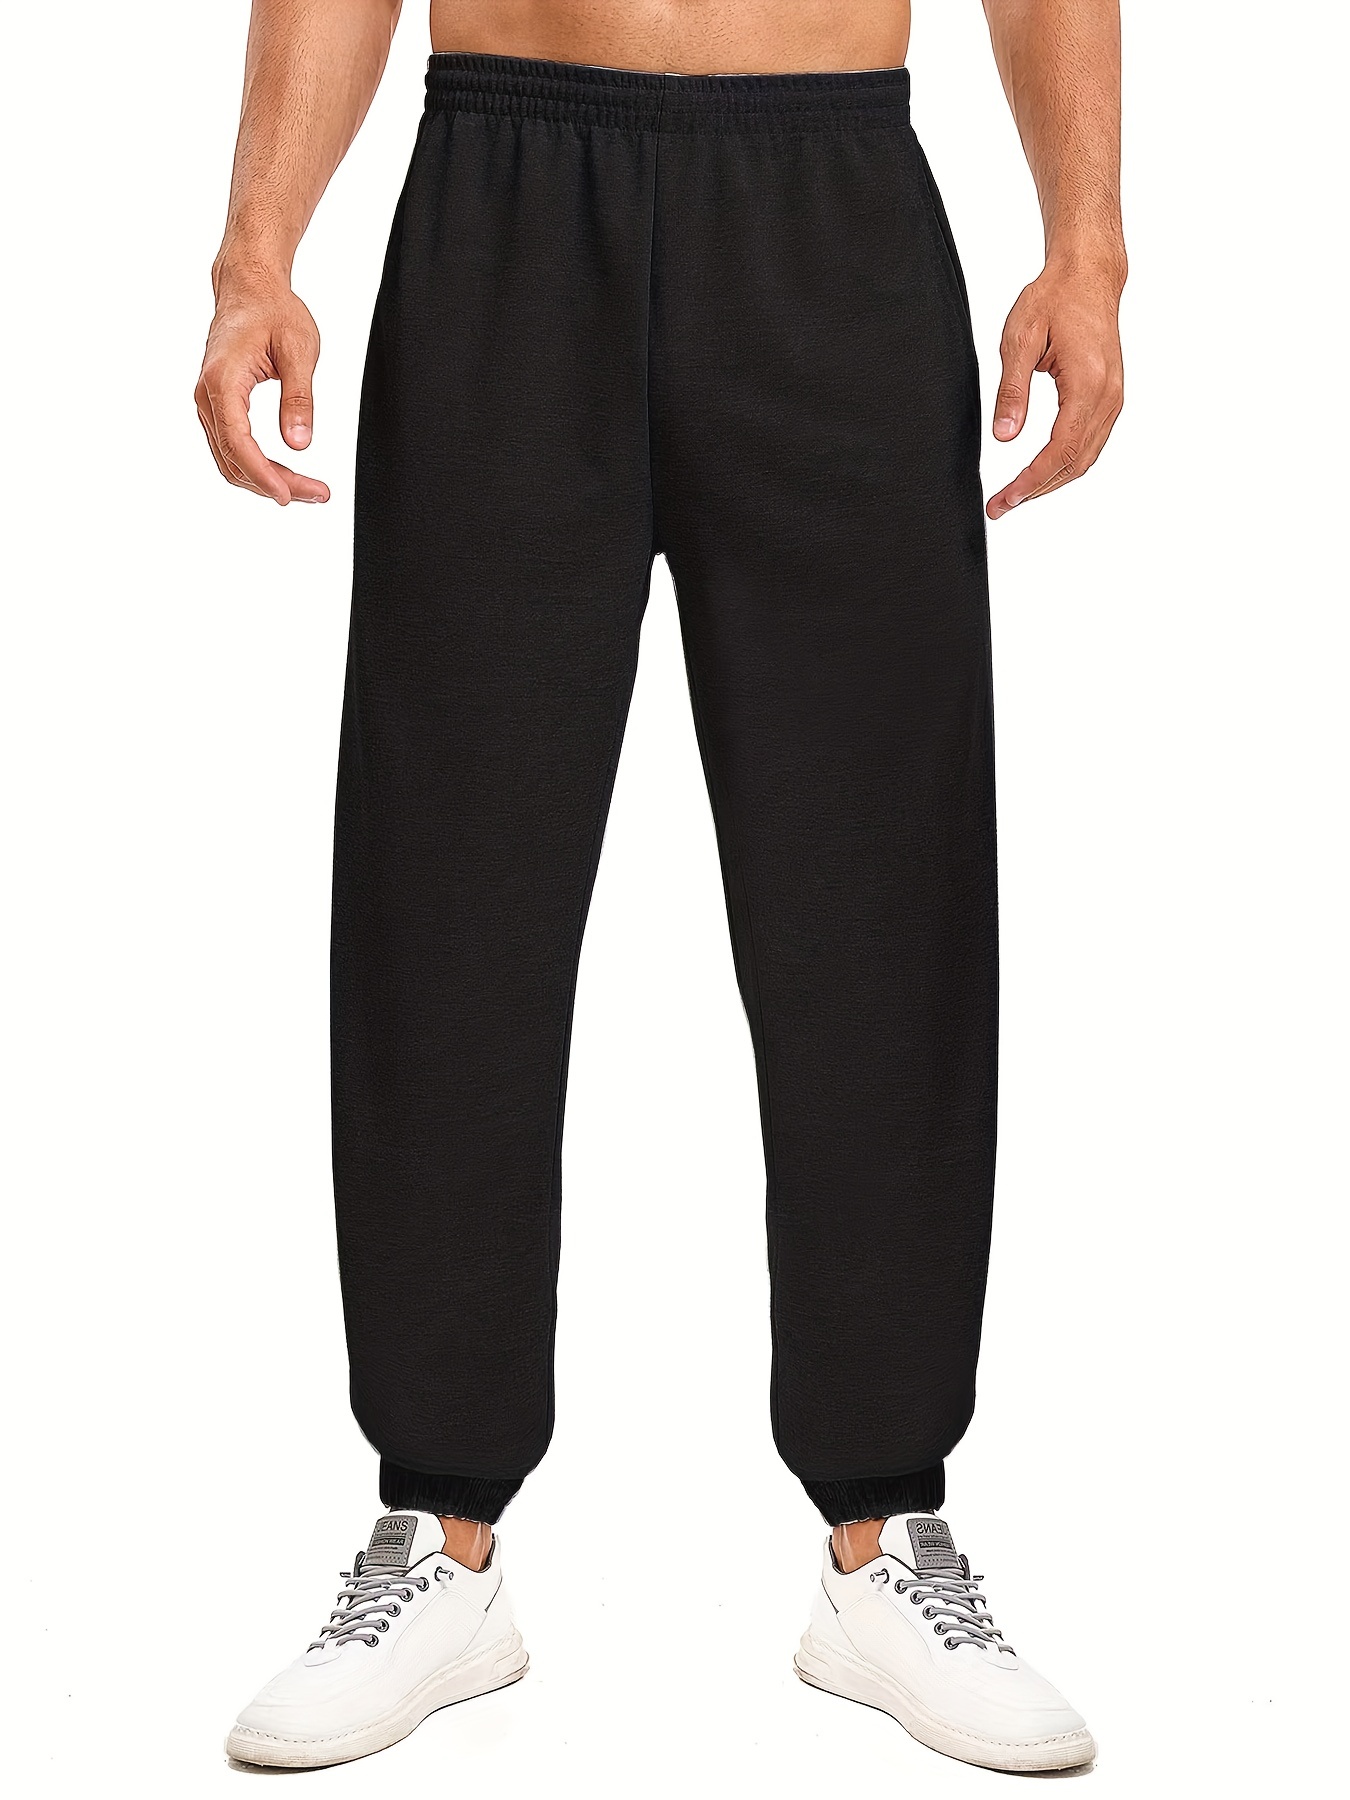 Solid Loose Basic Jogger Sweatpants, Versatile Comfy Pants For Fall &  Winter, Women's Clothing